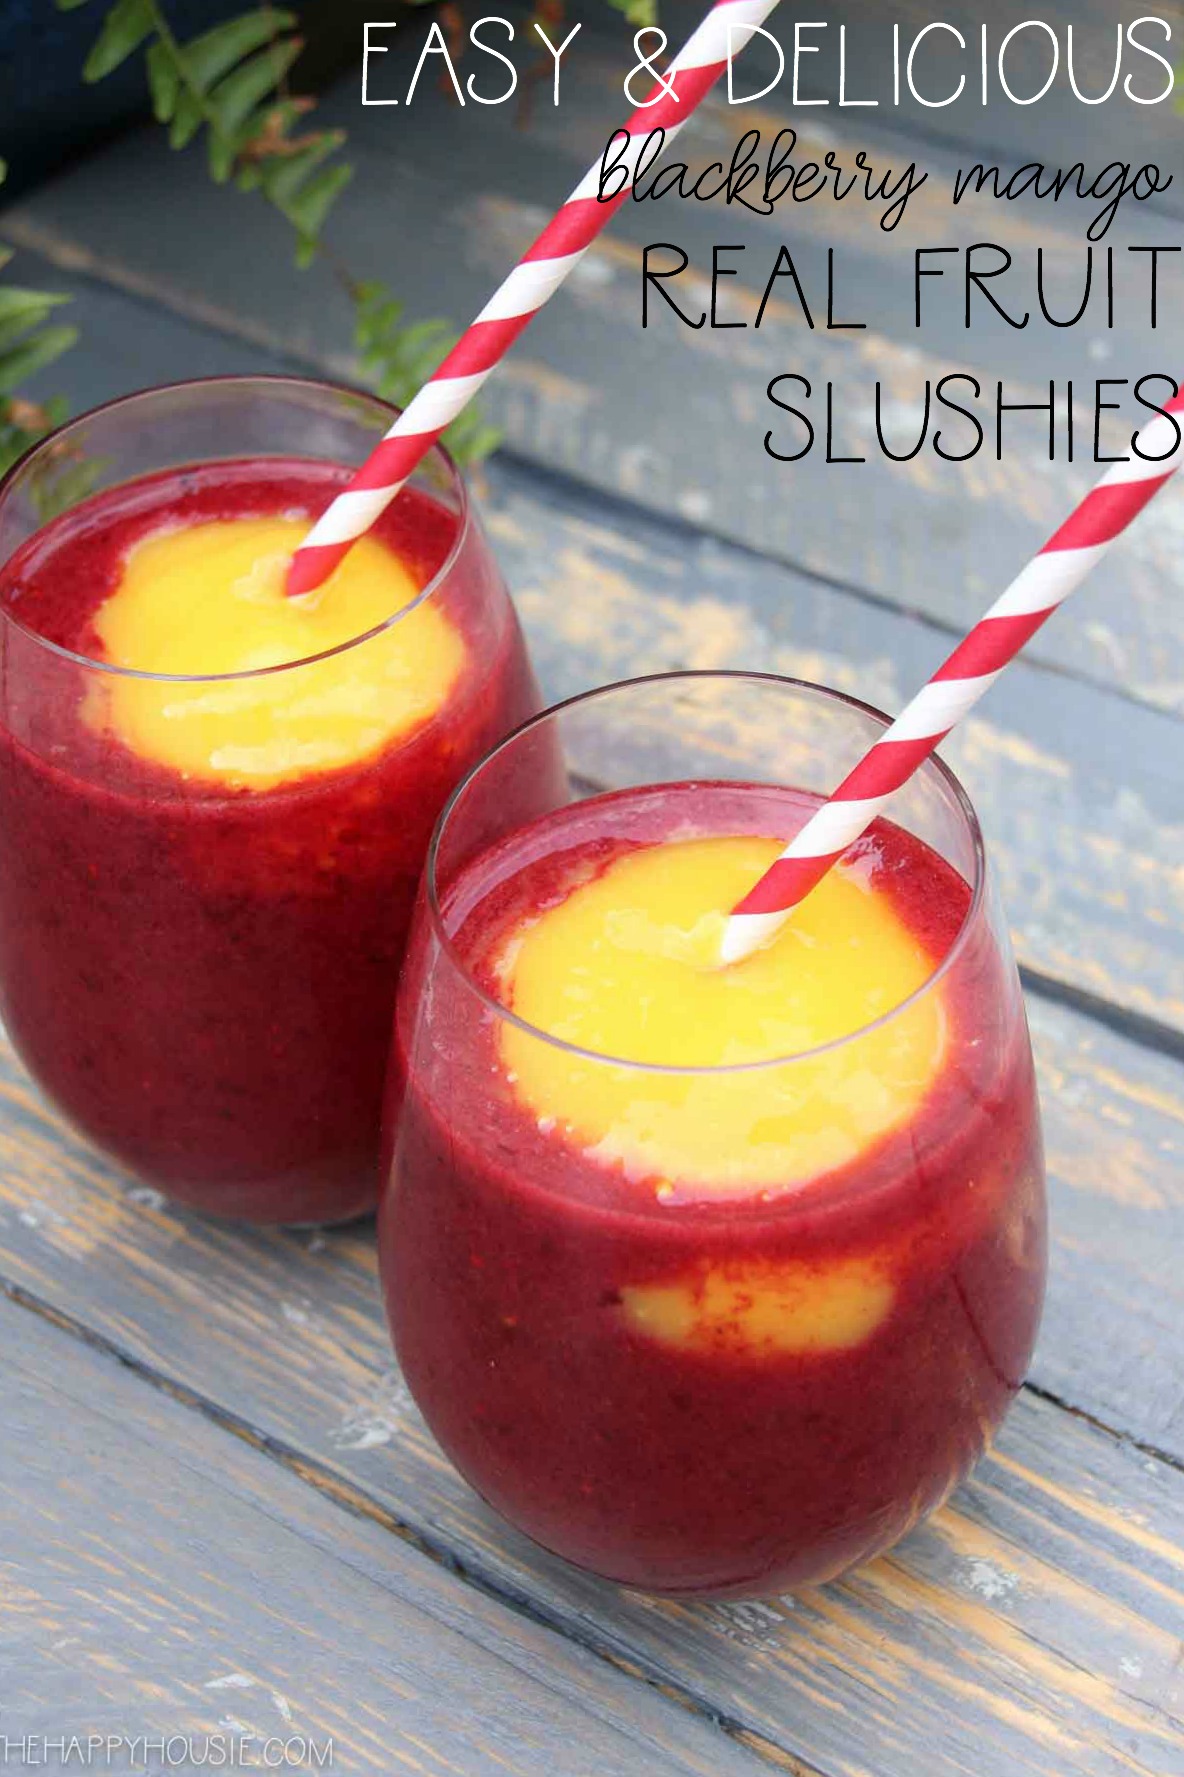 Easy & Delicious Blackberry Real Fruit Slushies on a table.